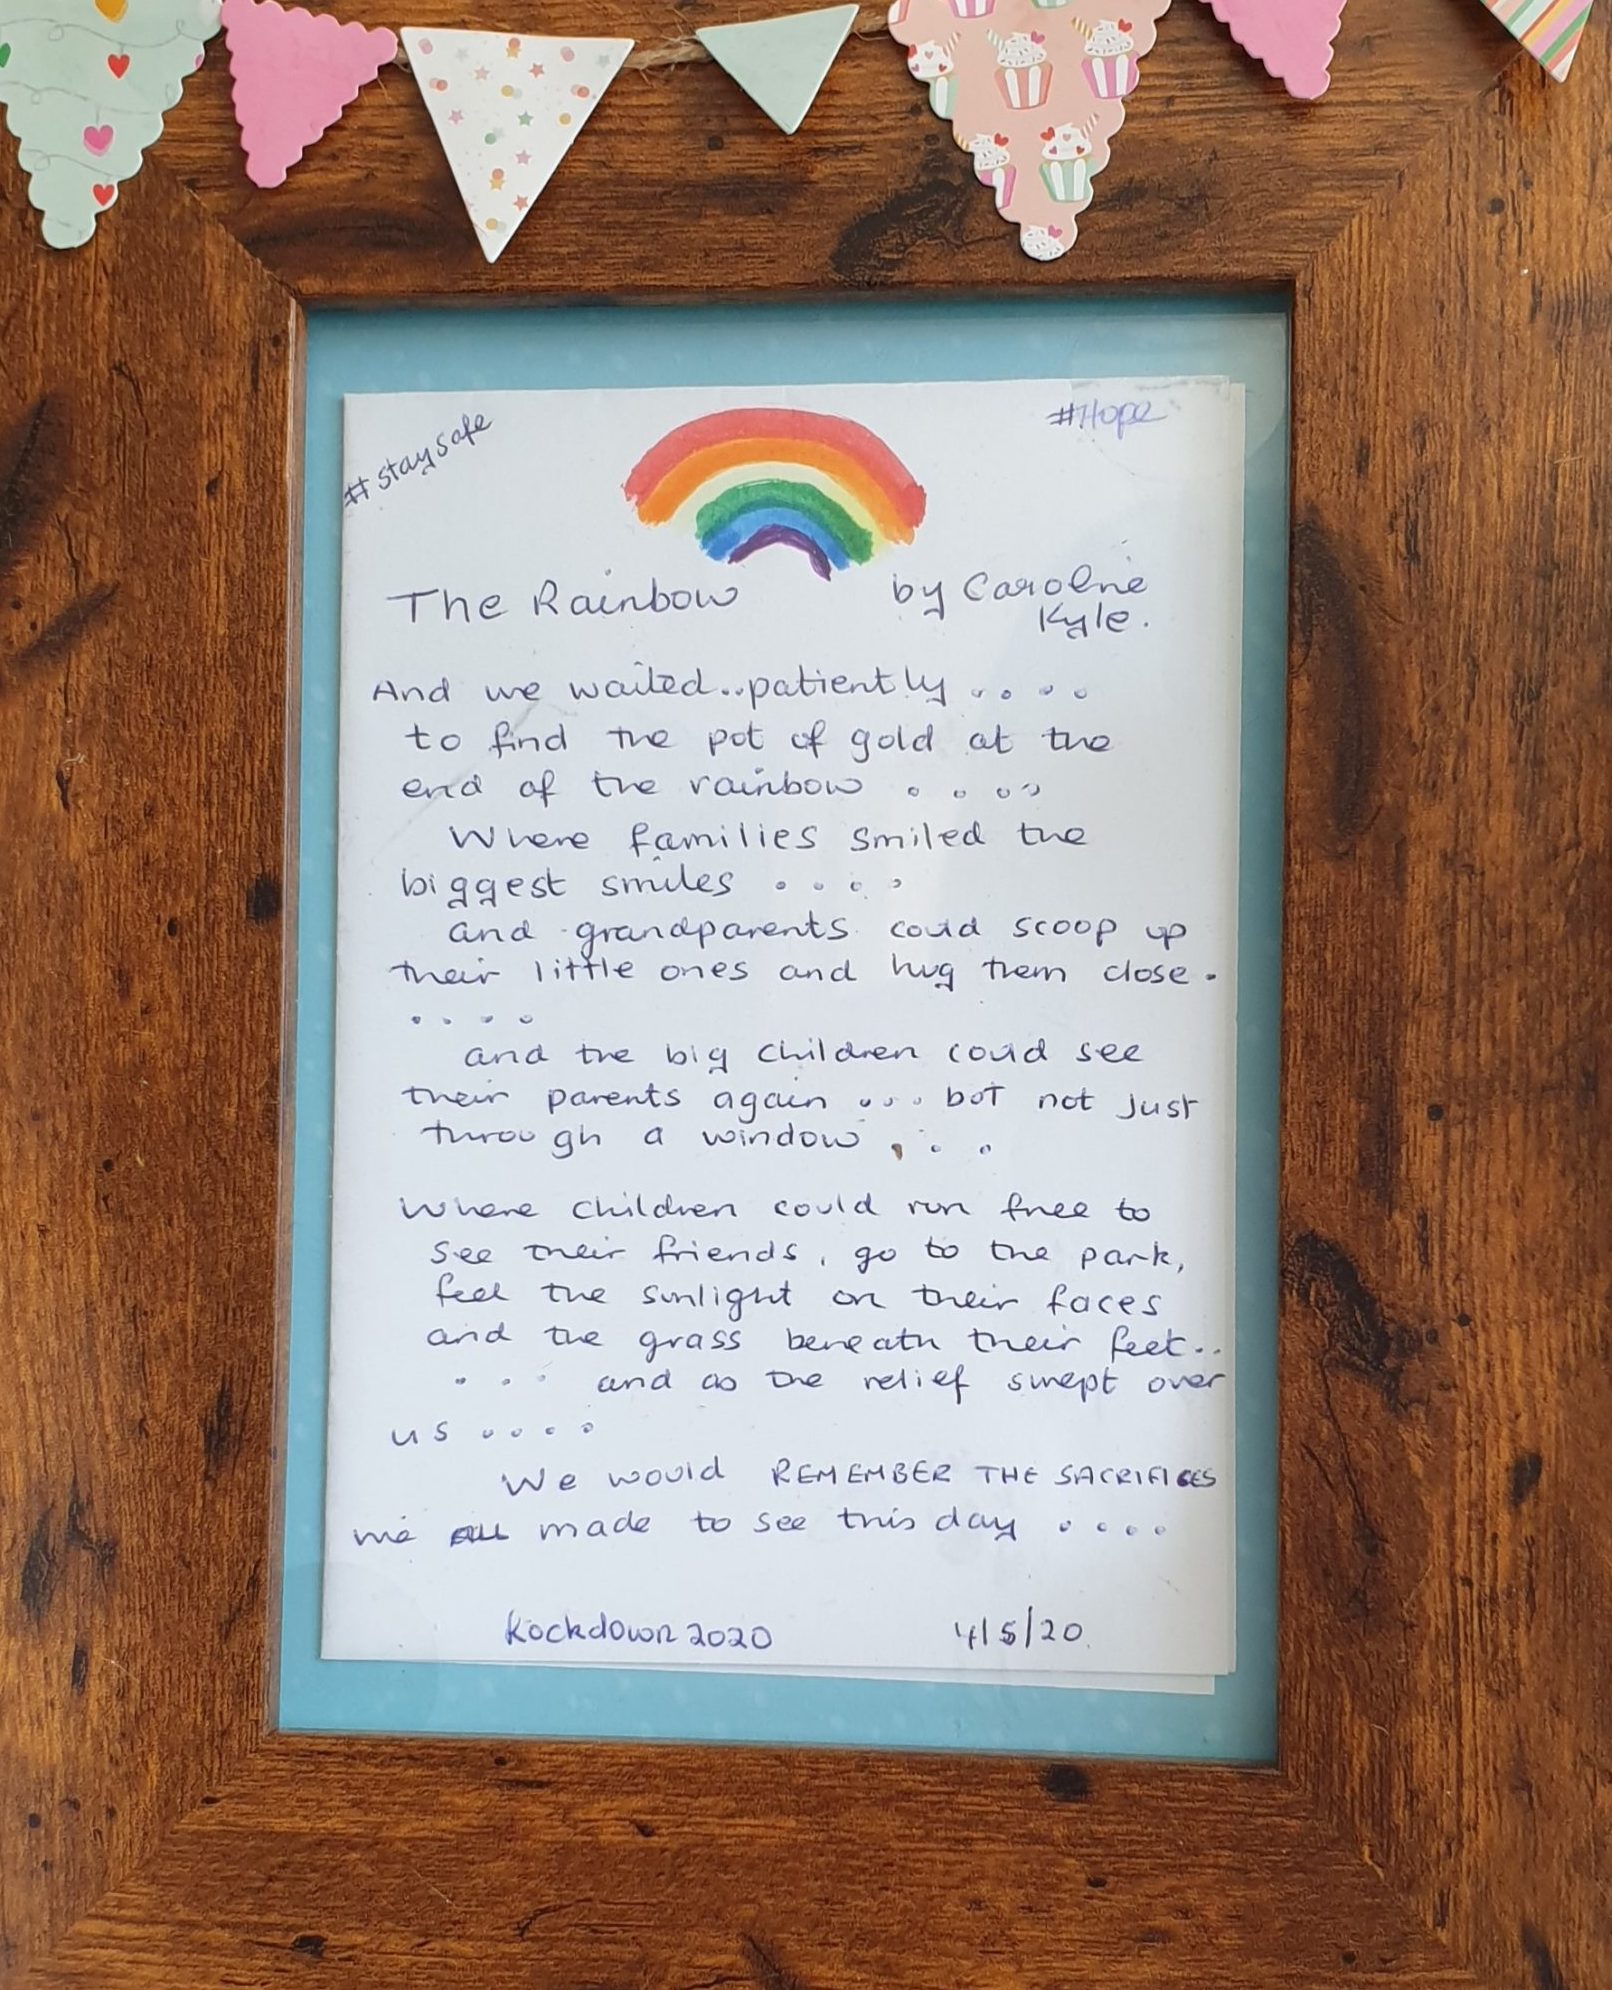 Framed poem titled The Rainbow. The poem is about Covid-19